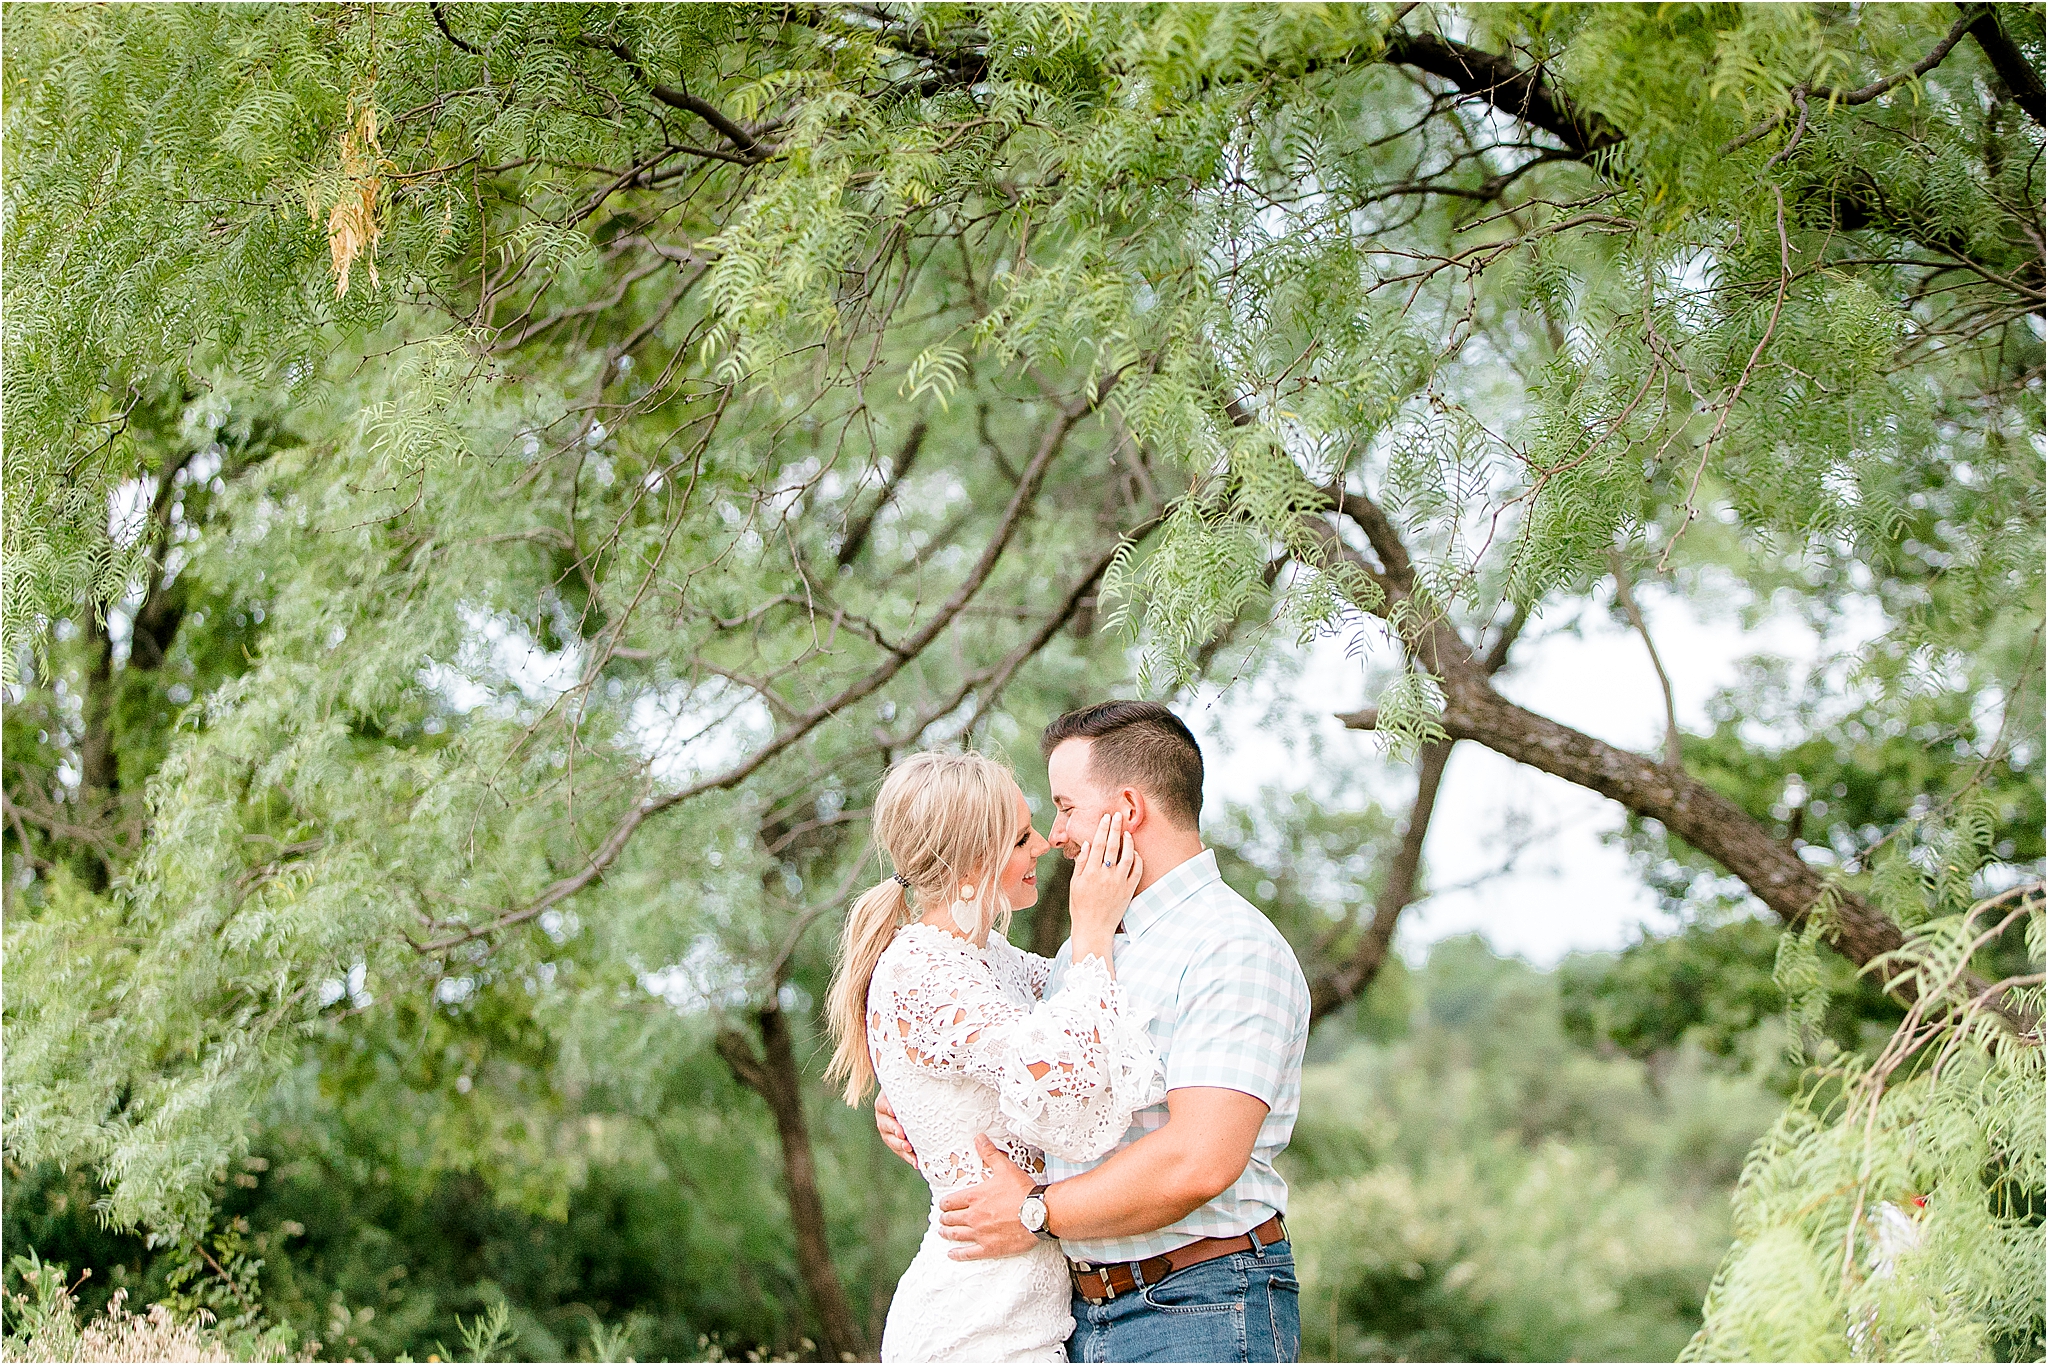 A blond woman in a lace dress puts her hand on her fiance's cheek under a tree during their Tandy Hills Engagement Session 